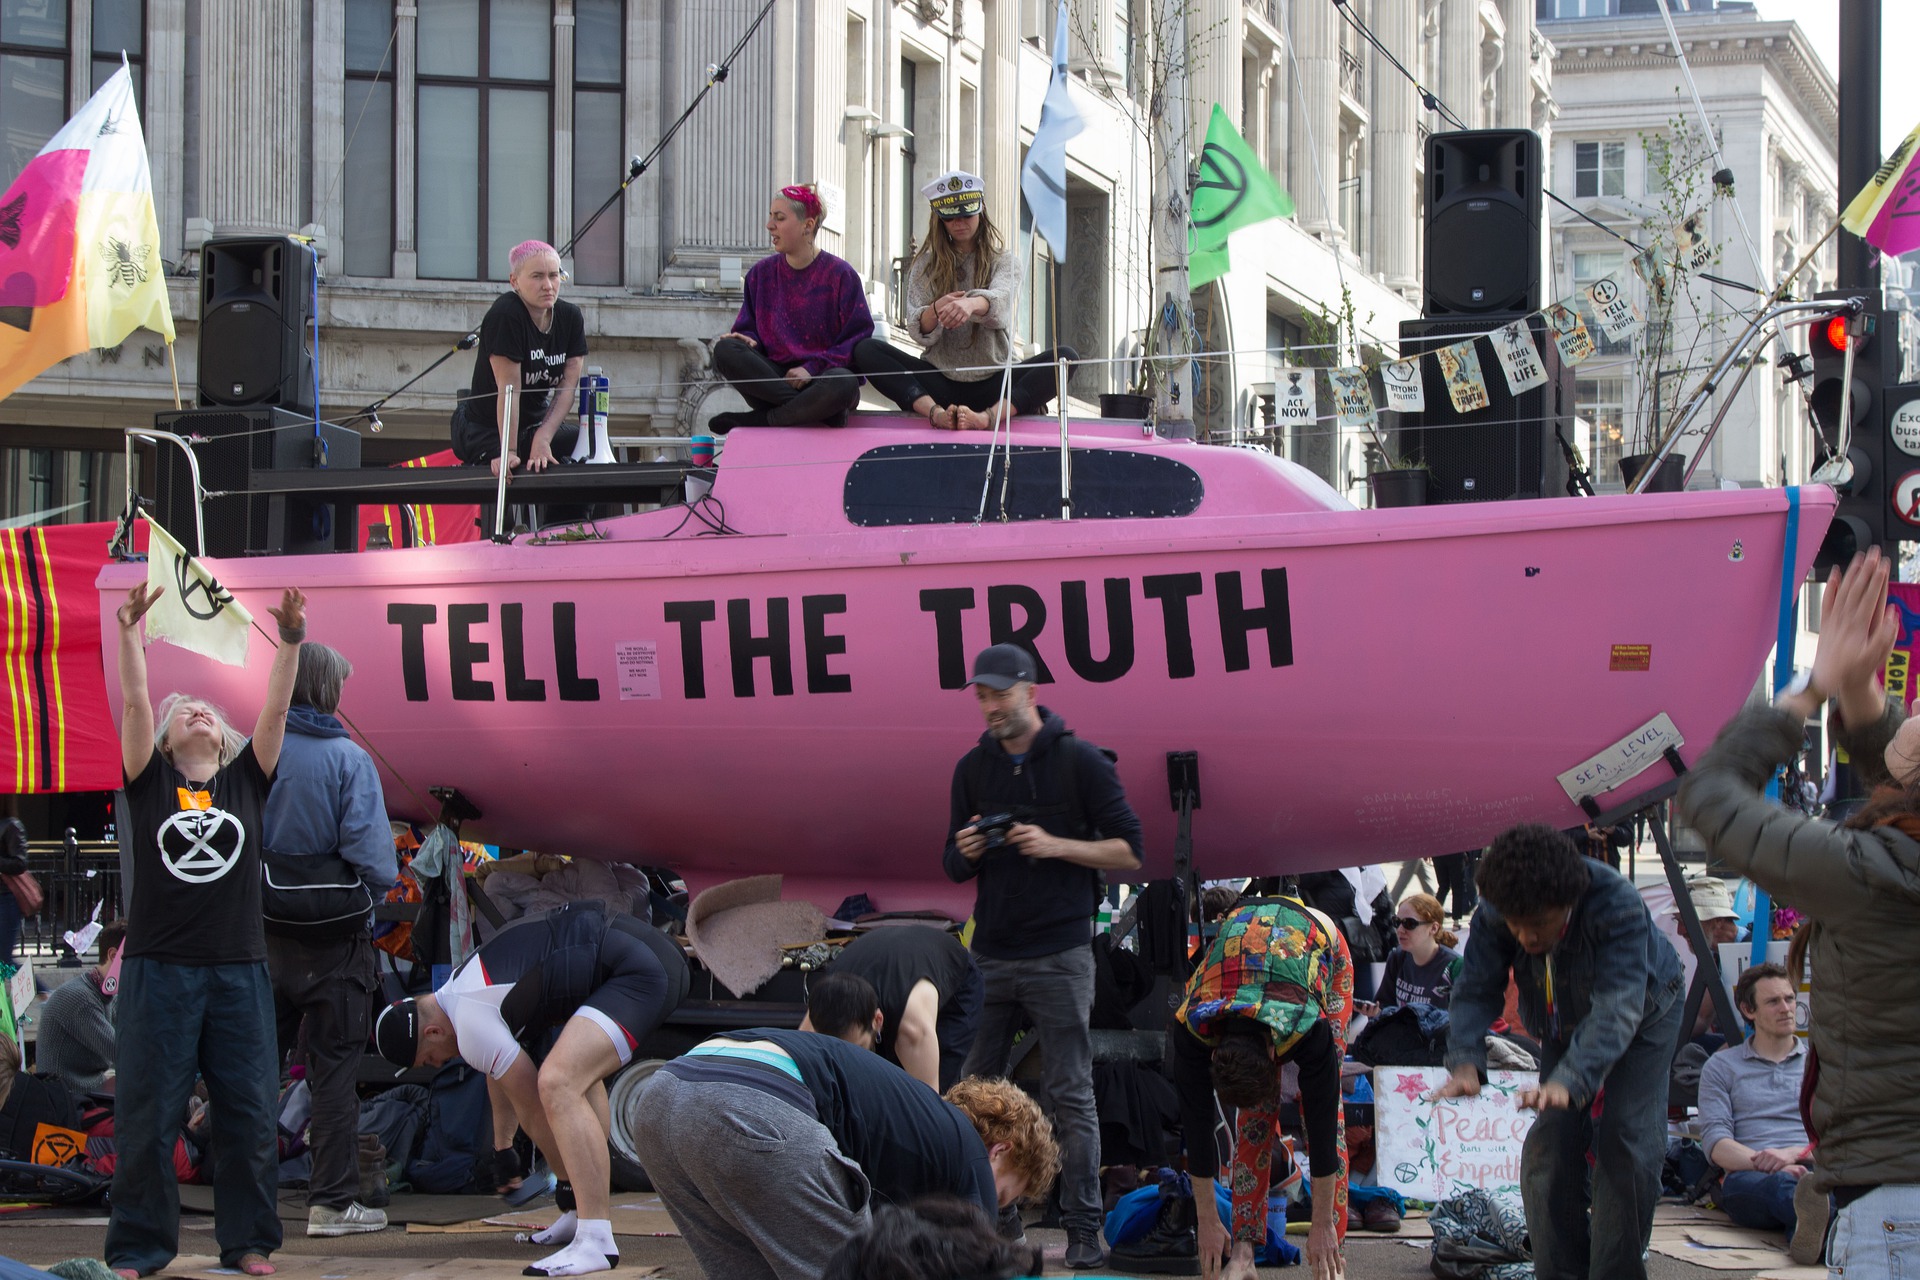 Extinction Rebellion pink boat reading "Tell the truth"